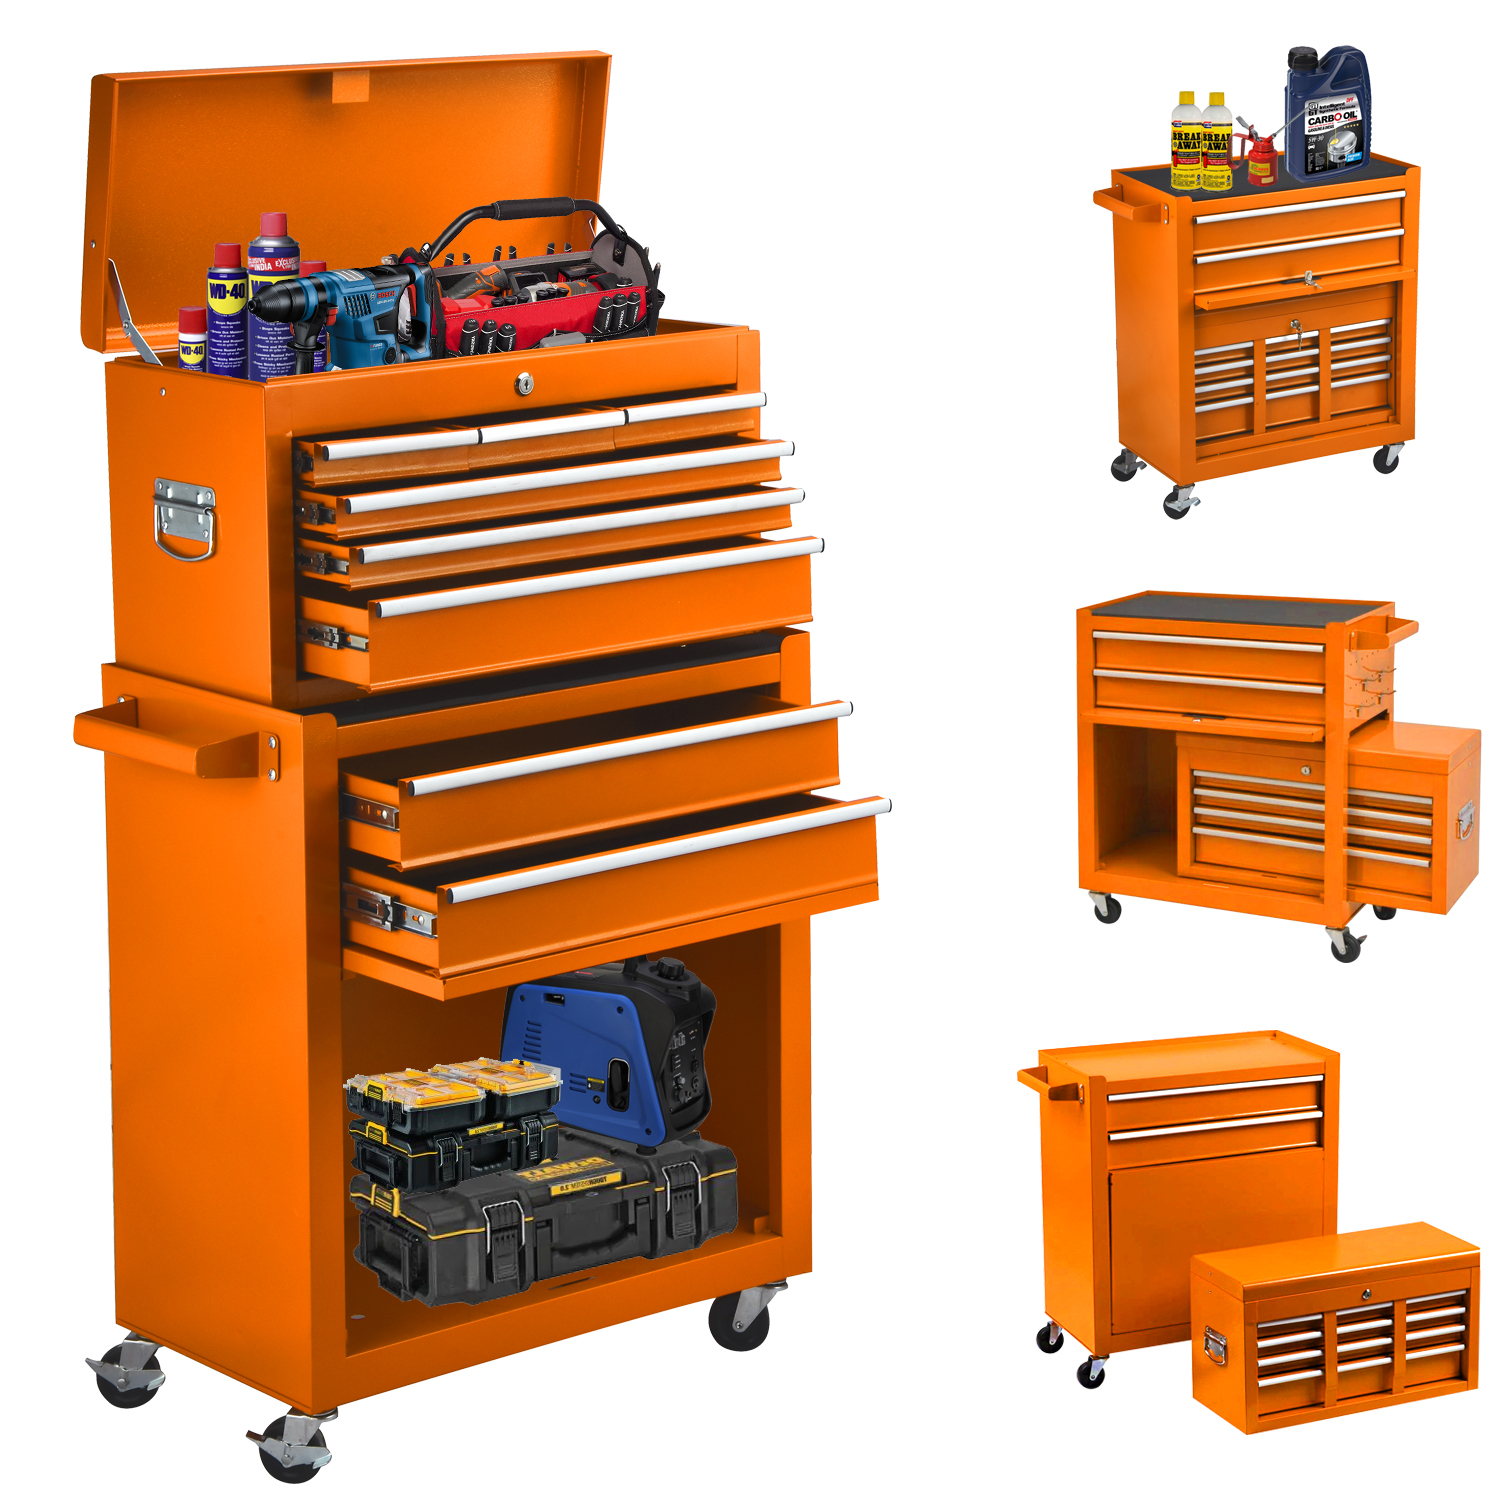 8-Drawer Tool Chest with Wheels, Tool Storage Cabinet and Tool Box, Lockable Rolling Tool Chest with Drawers, Toolbox Organizer for Garage Warehouse Workshop (Orange) - image 1 of 8